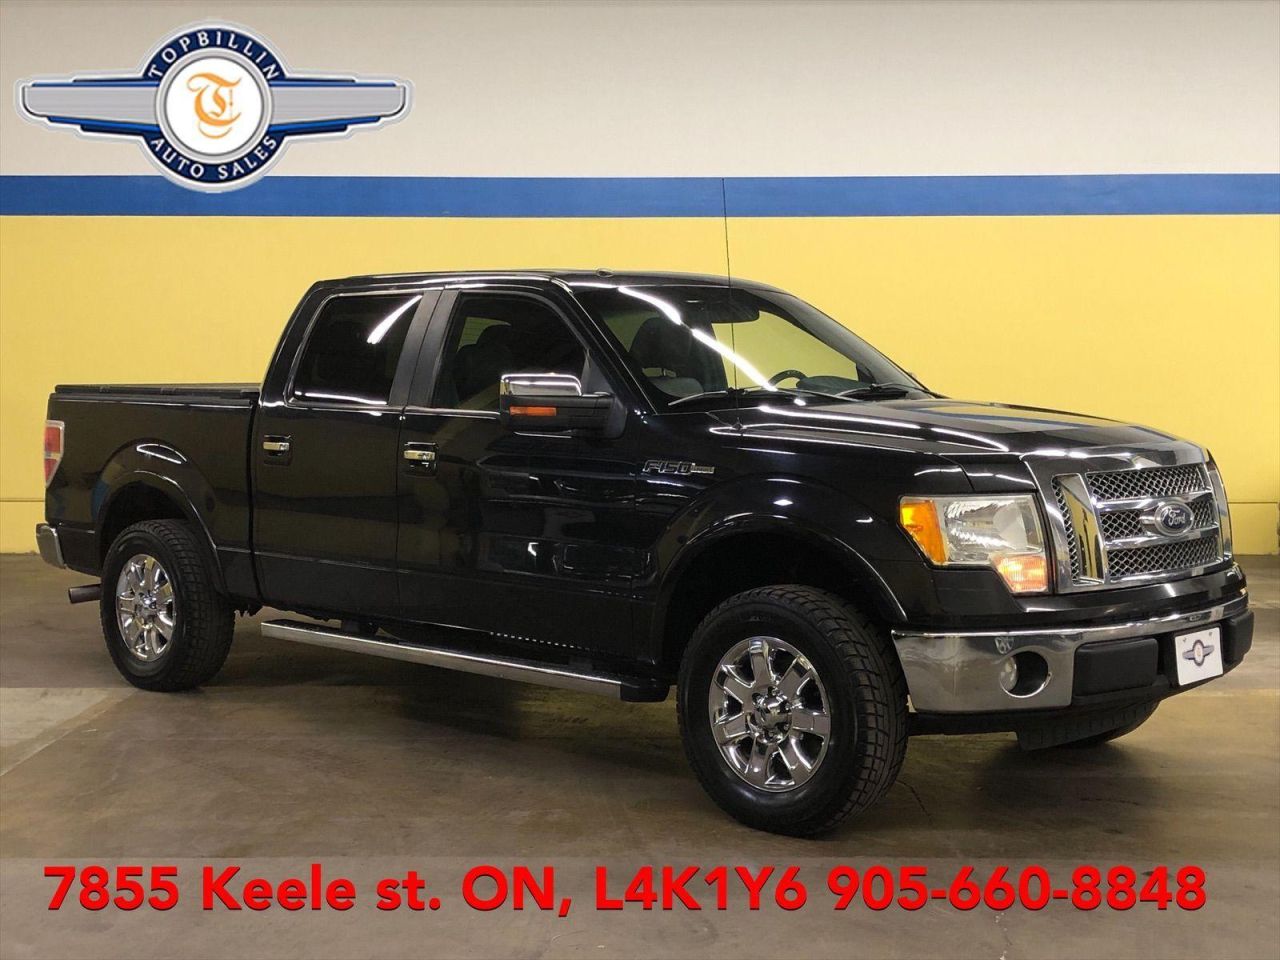 2010 Ford F-150 Lariat SuperCrew, Leather, Sunroof, Navi & more